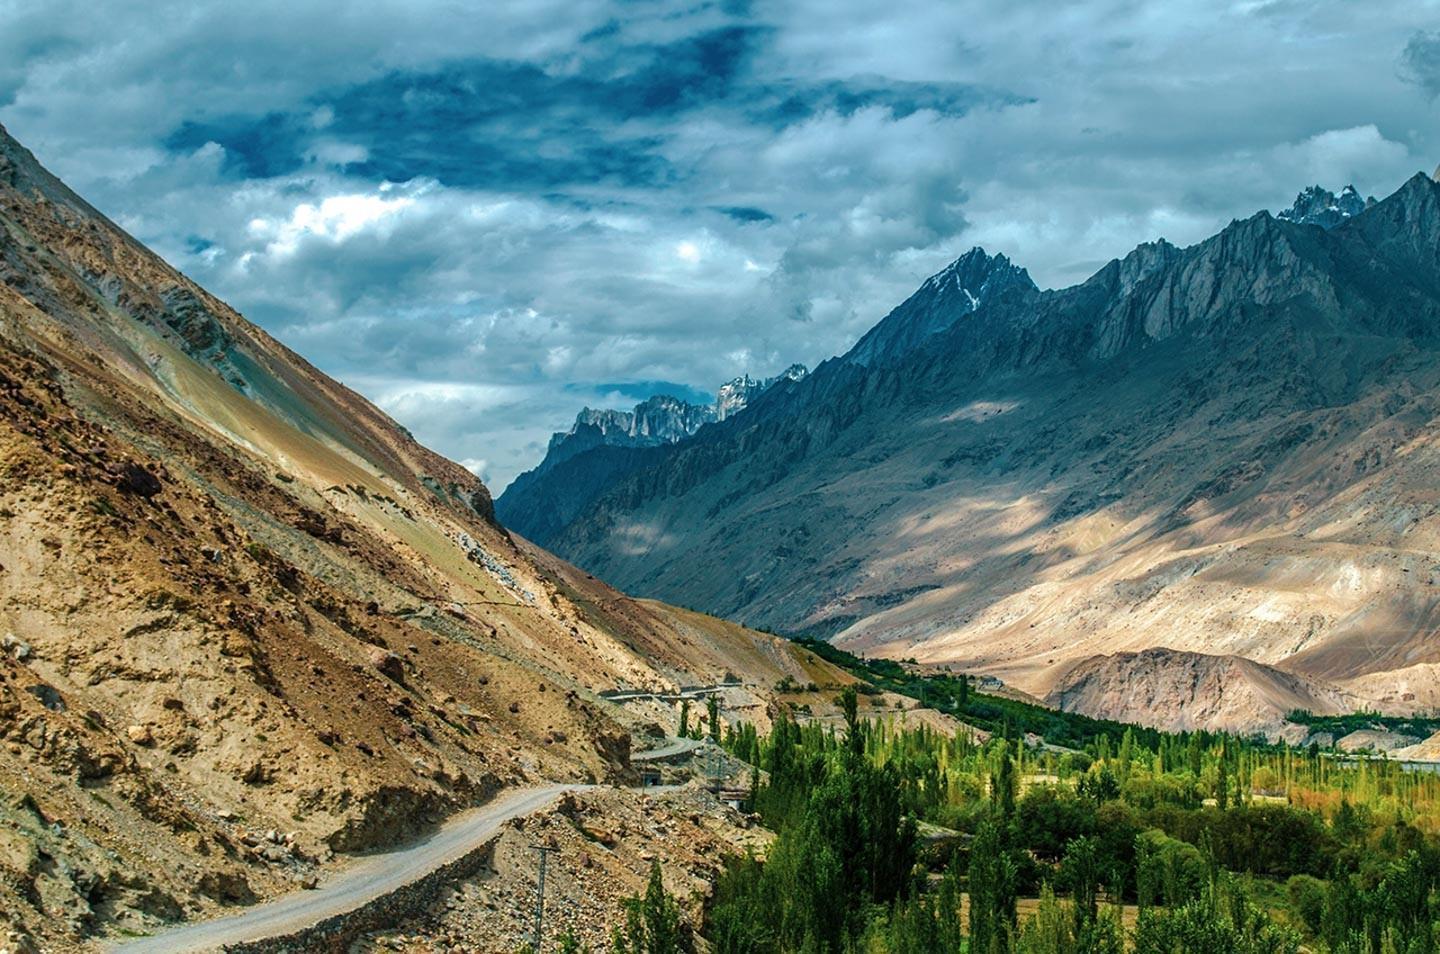 Route to Hushe Valley from Khaplu Gilgit Baltistan